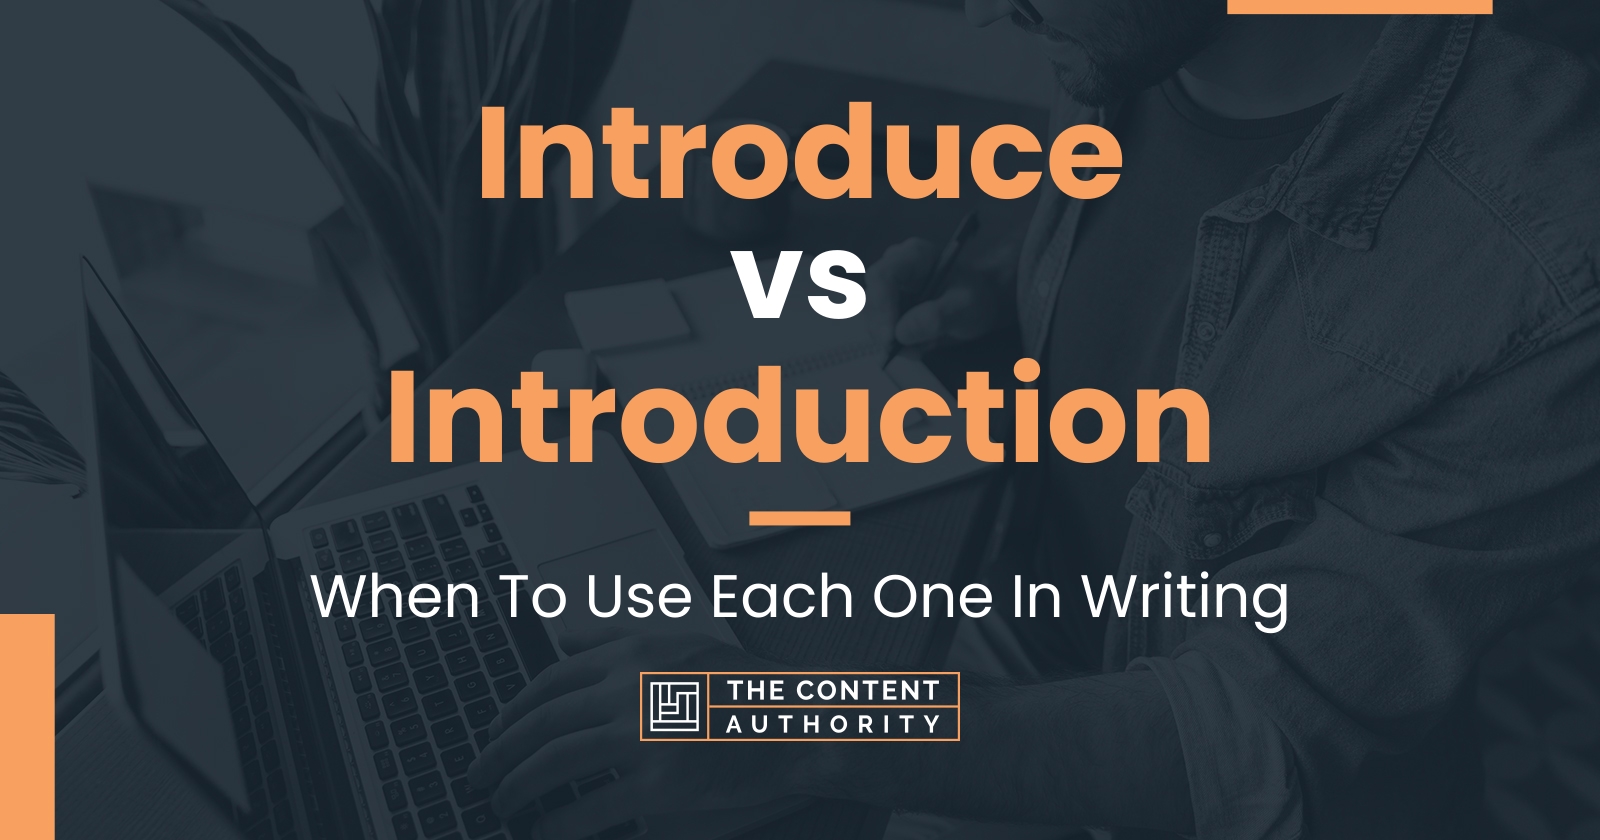 Introduce vs Introduction: When To Use Each One In Writing